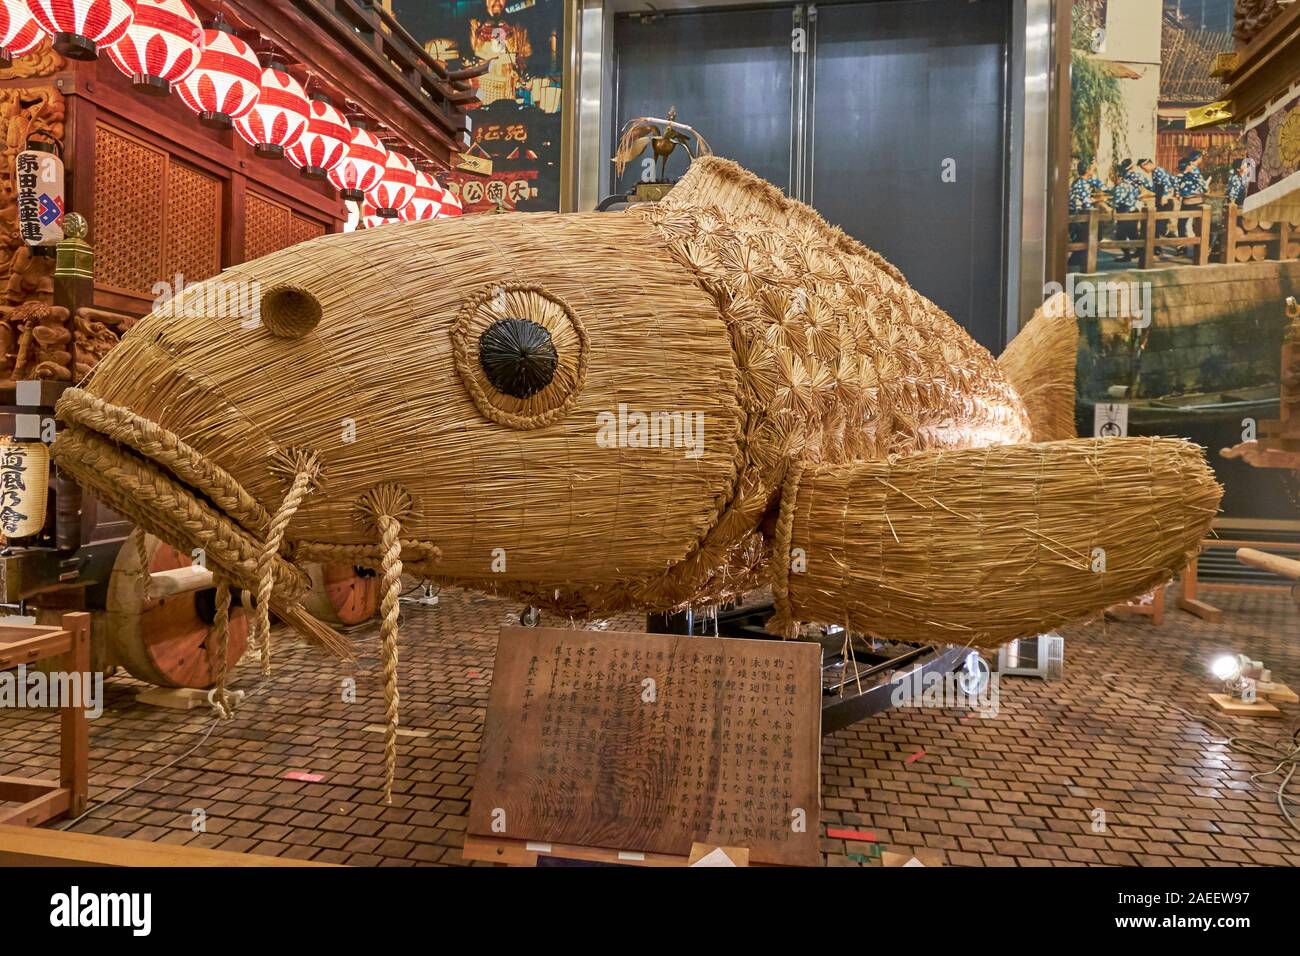 An Example Of A Traditional Grand Sawara Festival Woven Fish At The Float Museum In The Edo Era Section Of Sawara Japan Stock Photo Alamy